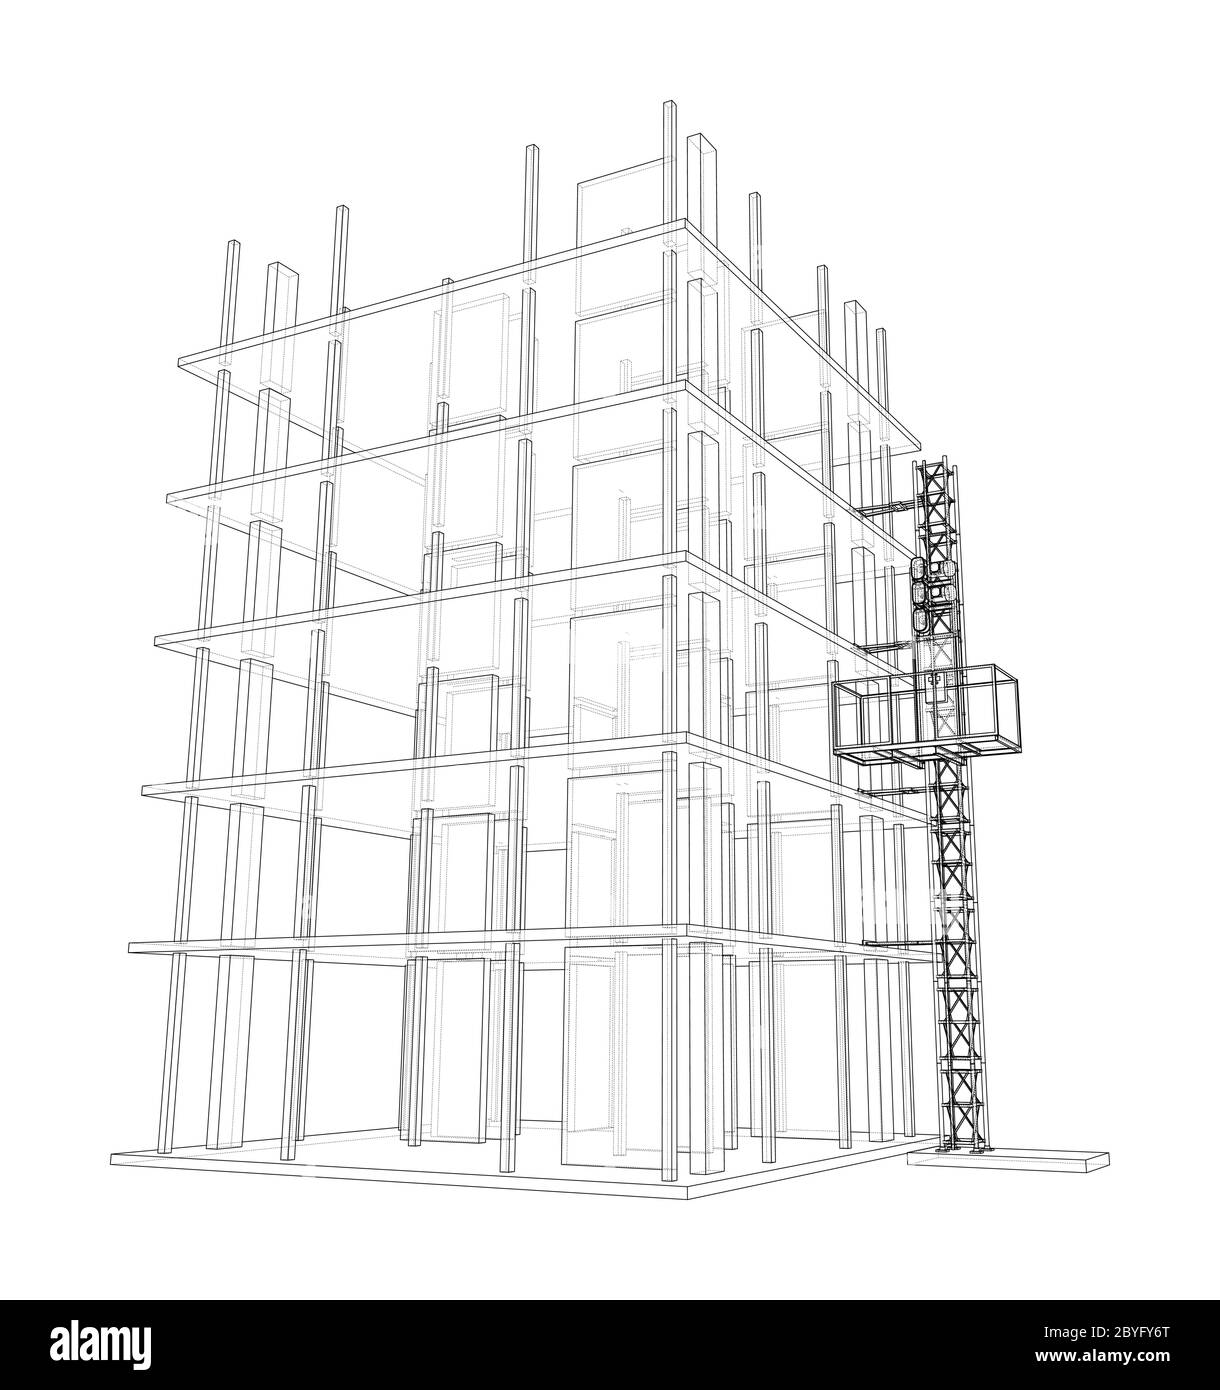 Building under construction with mast lifts Stock Vector